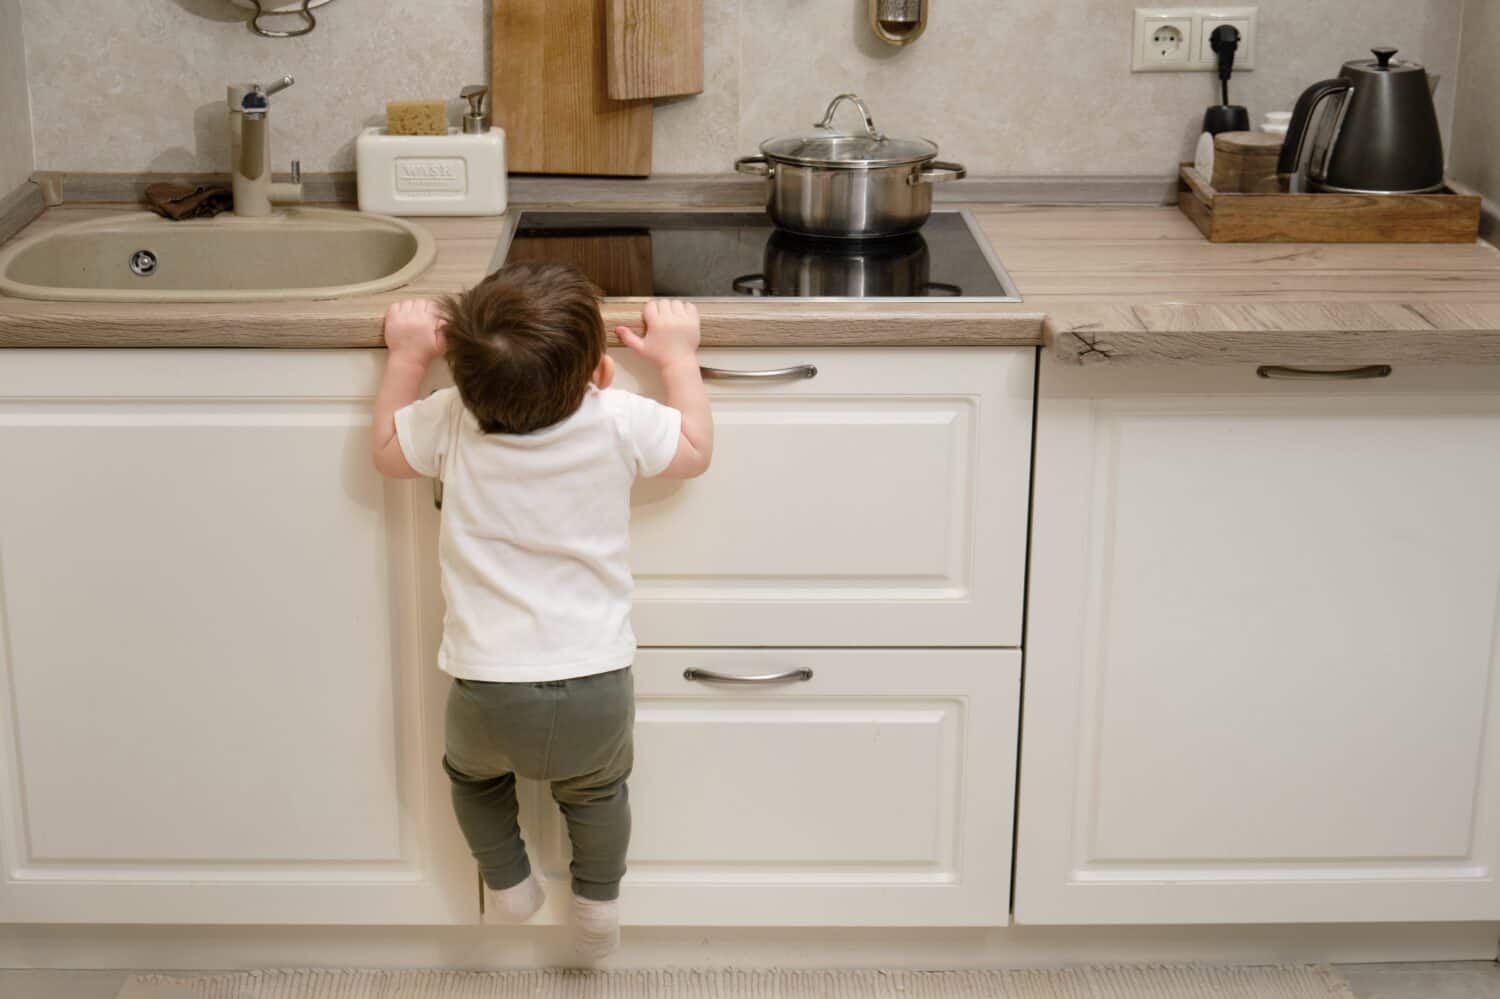 Toddler baby climbs on a hot electric stove in the home kitchen. A small child touches the surface of the stove with his hand at the risk of getting burned. Kid aged one year eight months